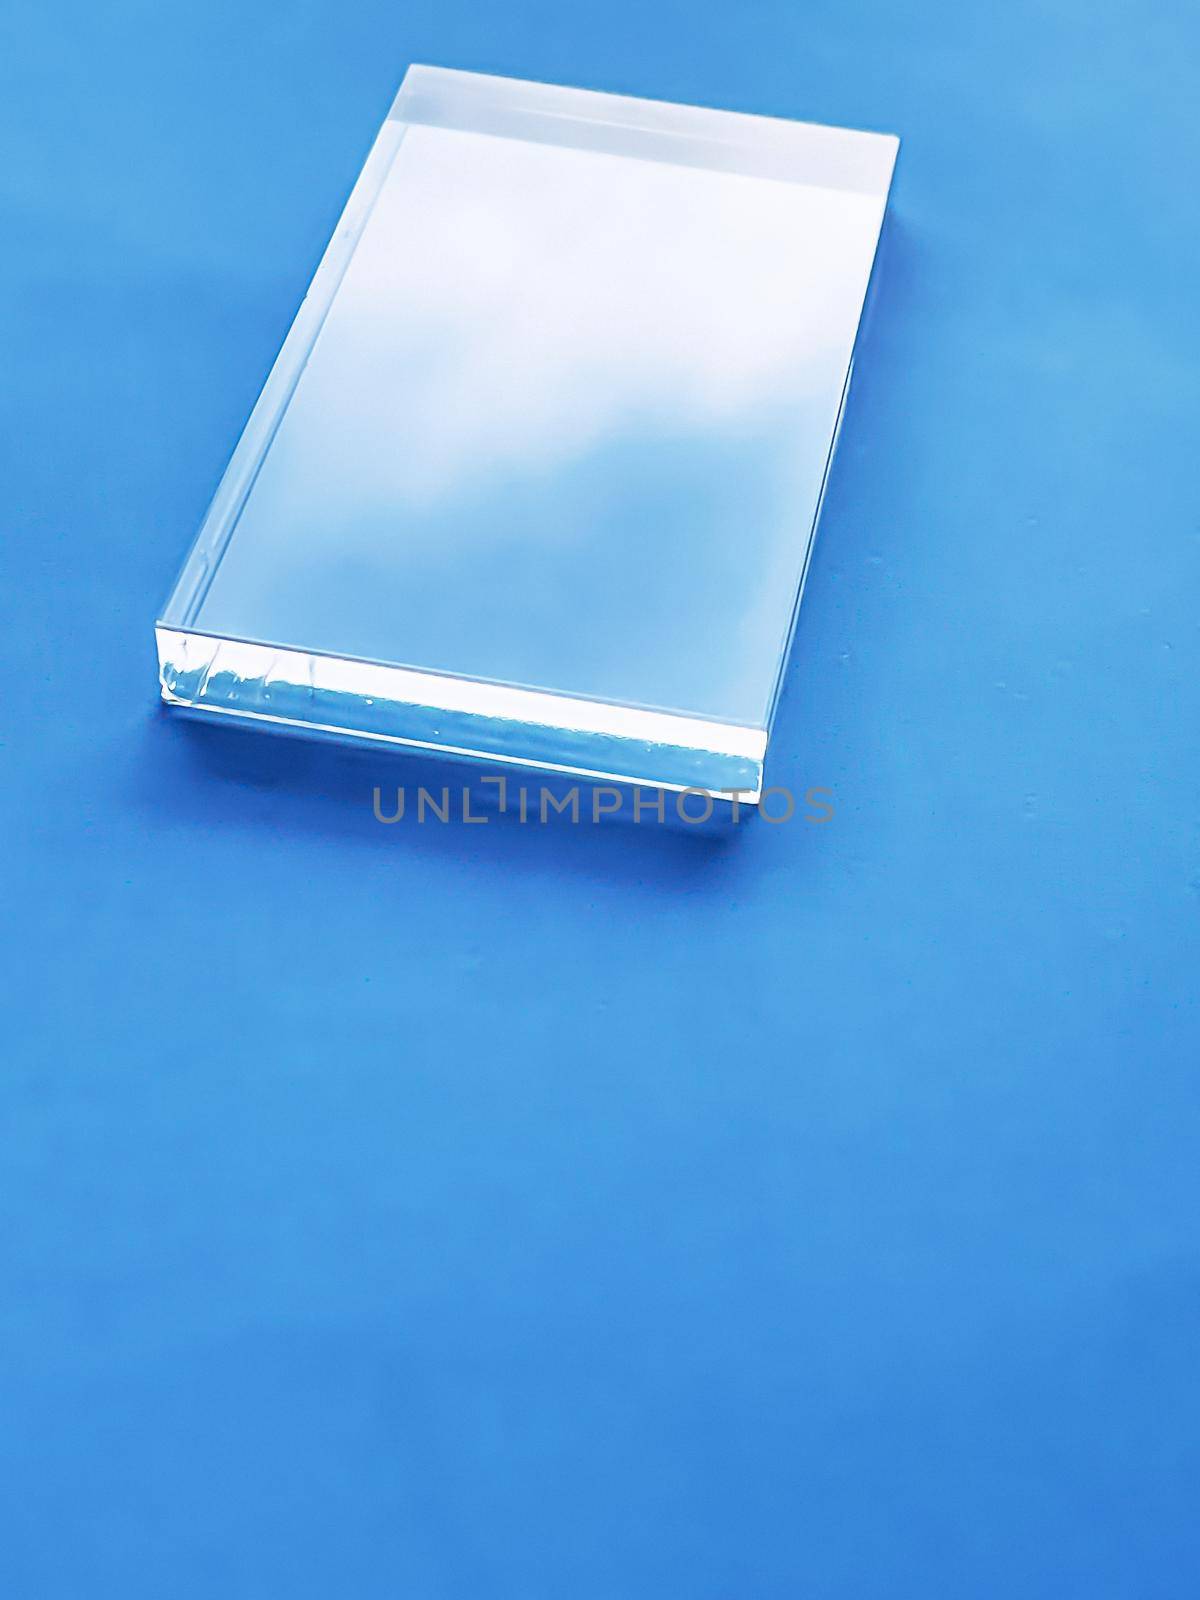 Glass device on blue background, future technology and abstract screen mockup design by Anneleven